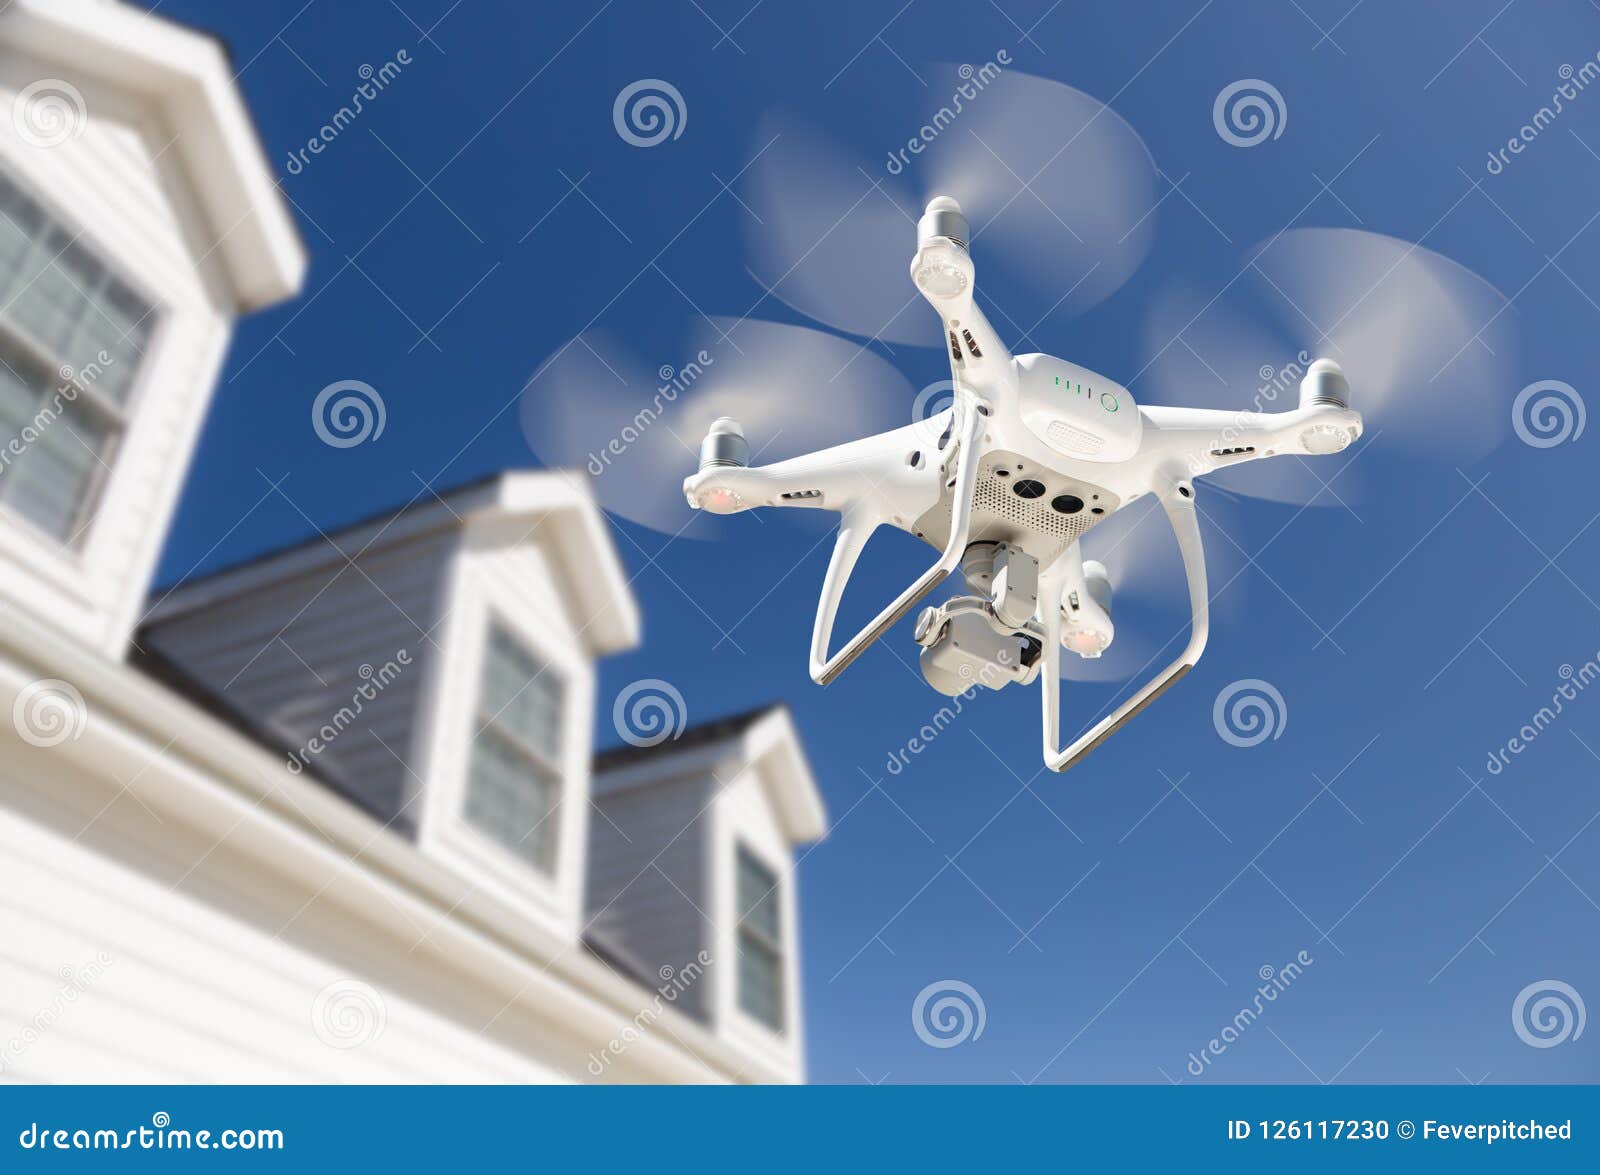 drone quadcopter flying, inspecting and photographing house